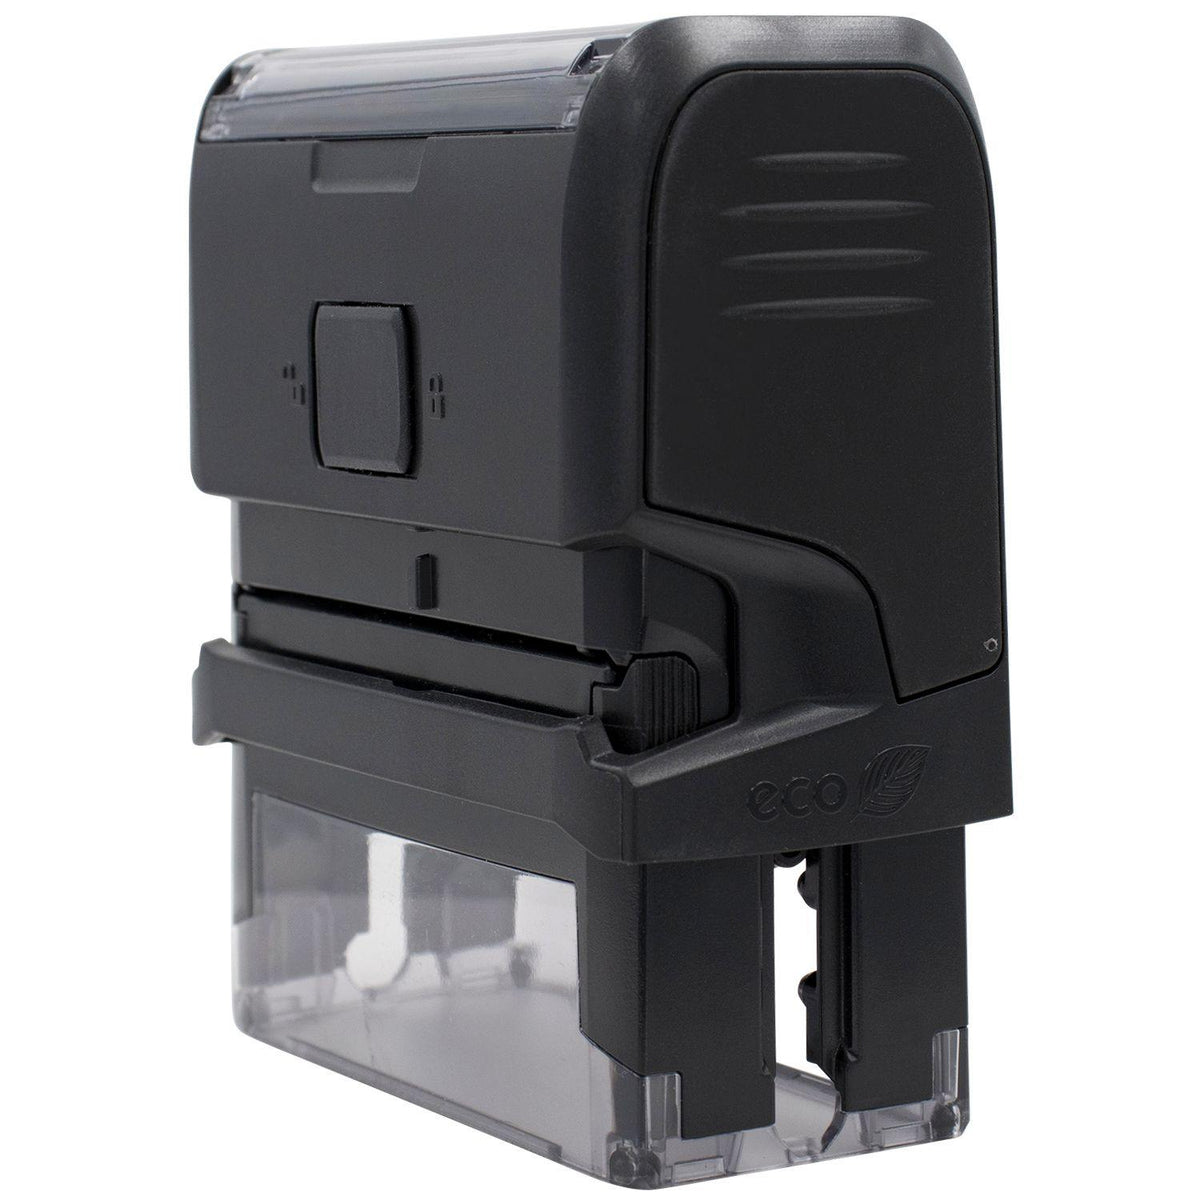 Self Inking Shred Stamp - Engineer Seal Stamps - Brand_Trodat, Impression Size_Small, Stamp Type_Self-Inking Stamp, Type of Use_Office